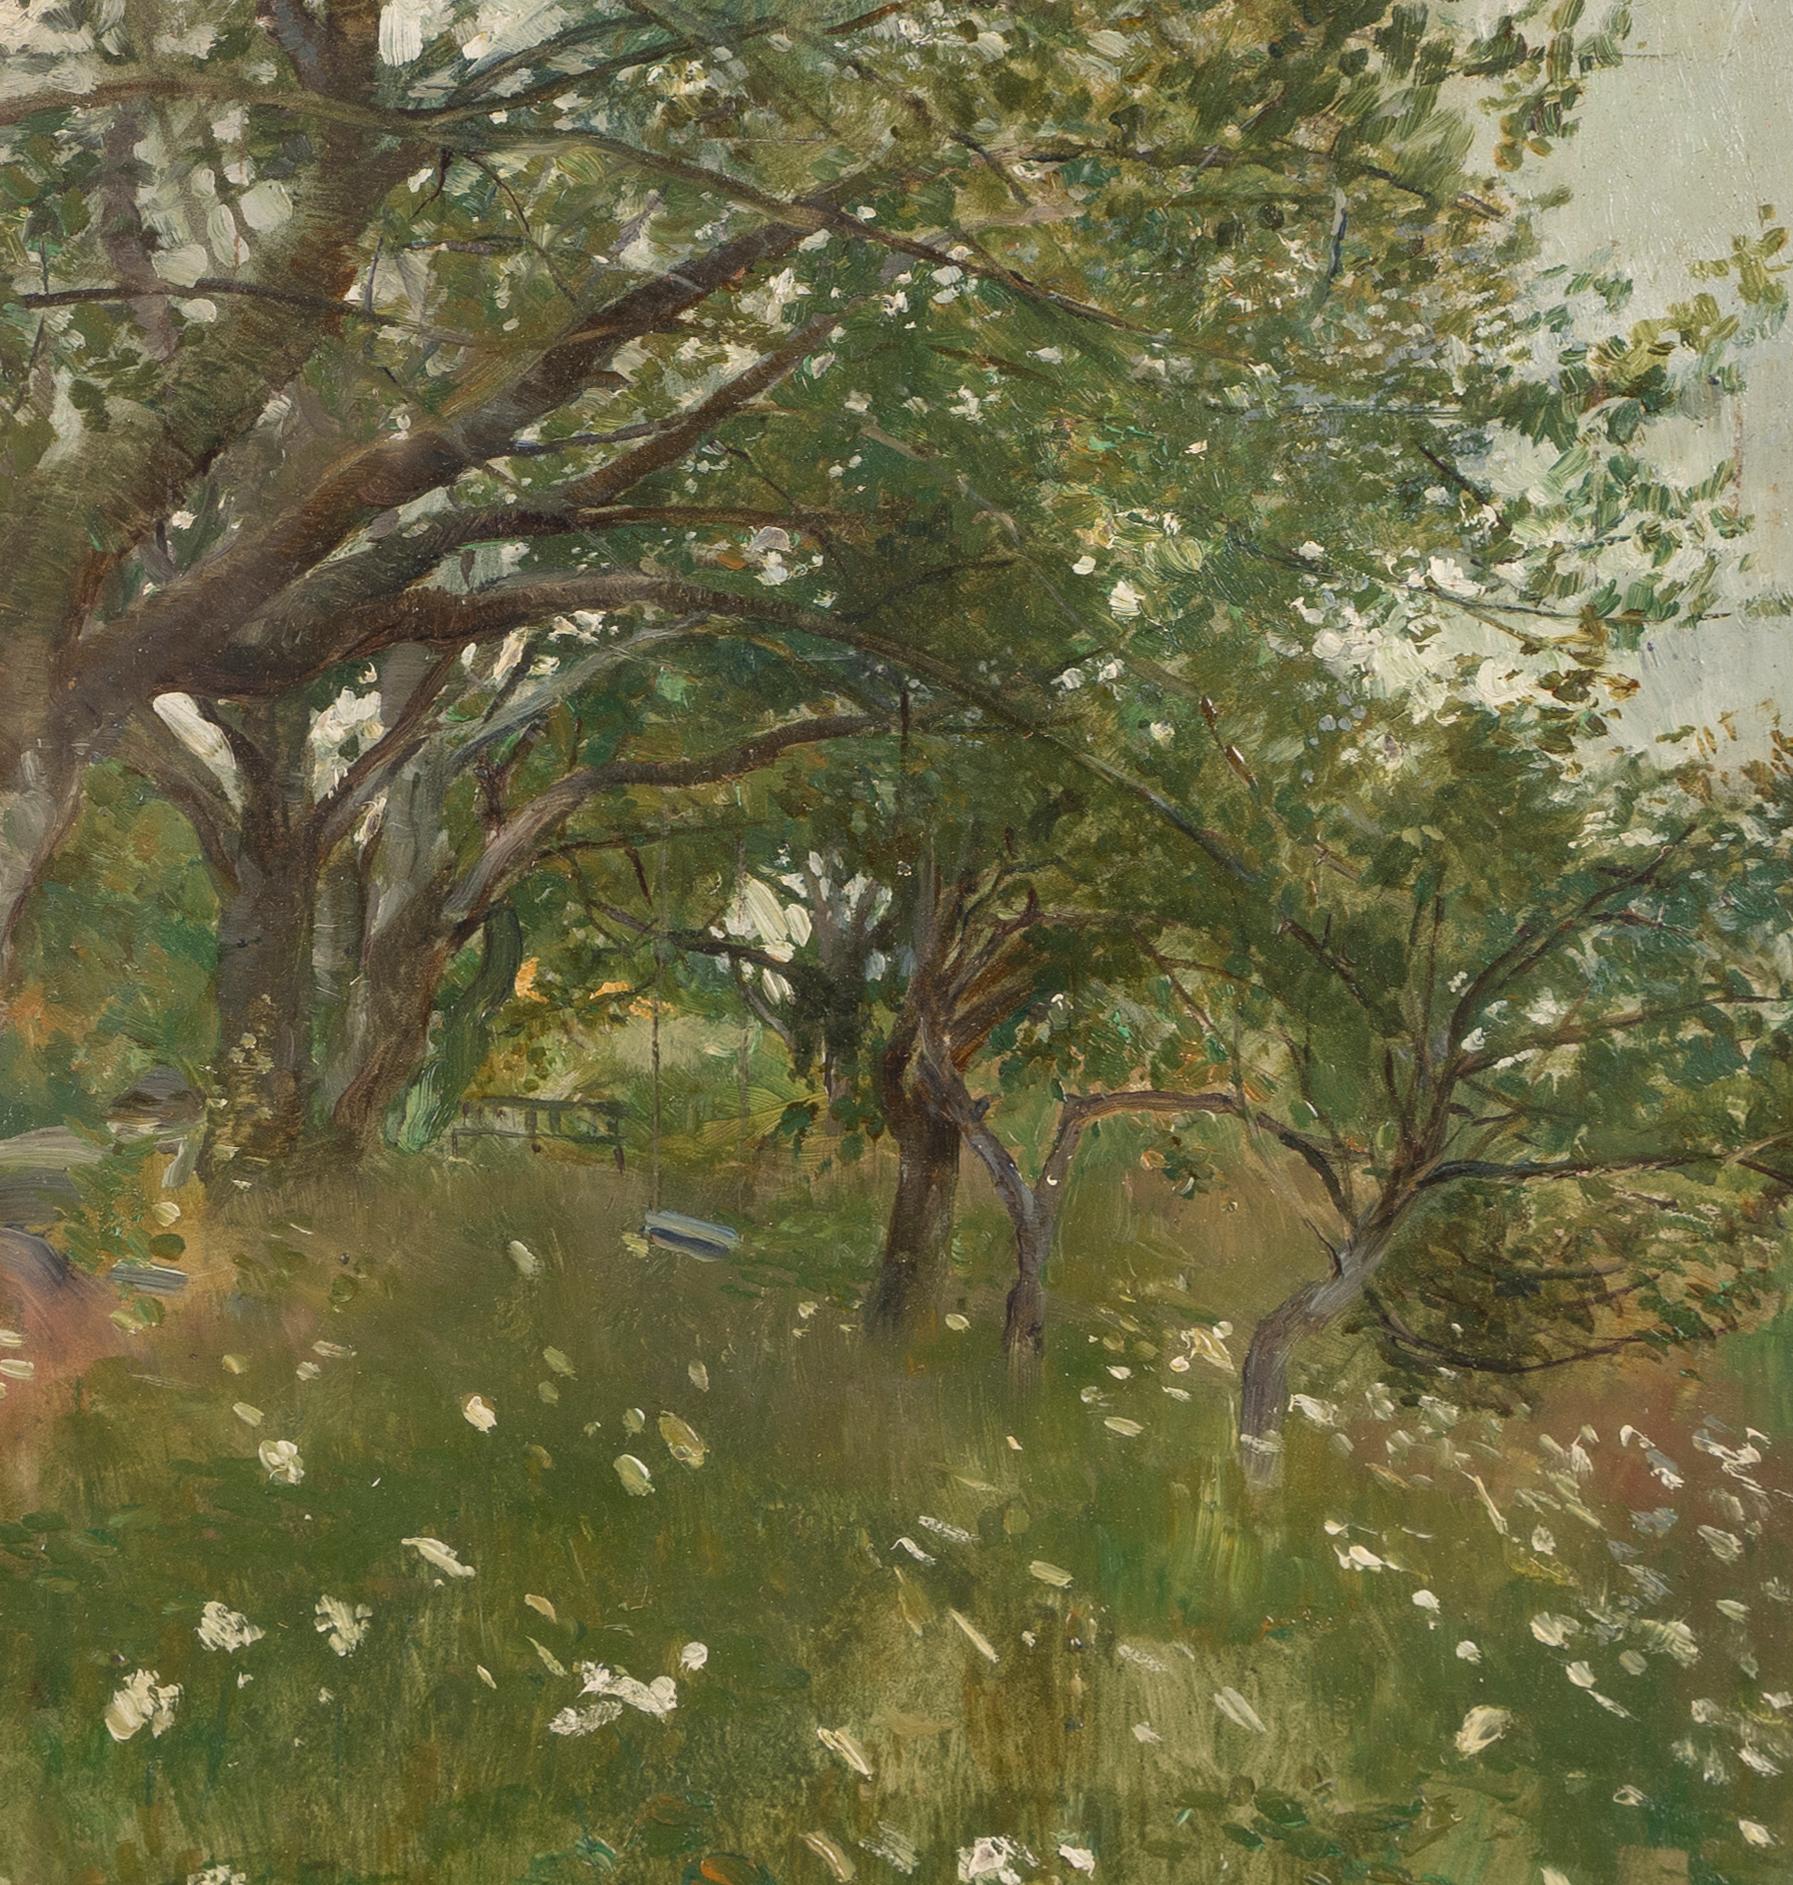 Antique American impressionist flower landscape oil painting by Edward S Annison.  Oil on board, circa 1910.  Unterschrieben.  Image size, 9L x 12H.  Housed in a period  frame.